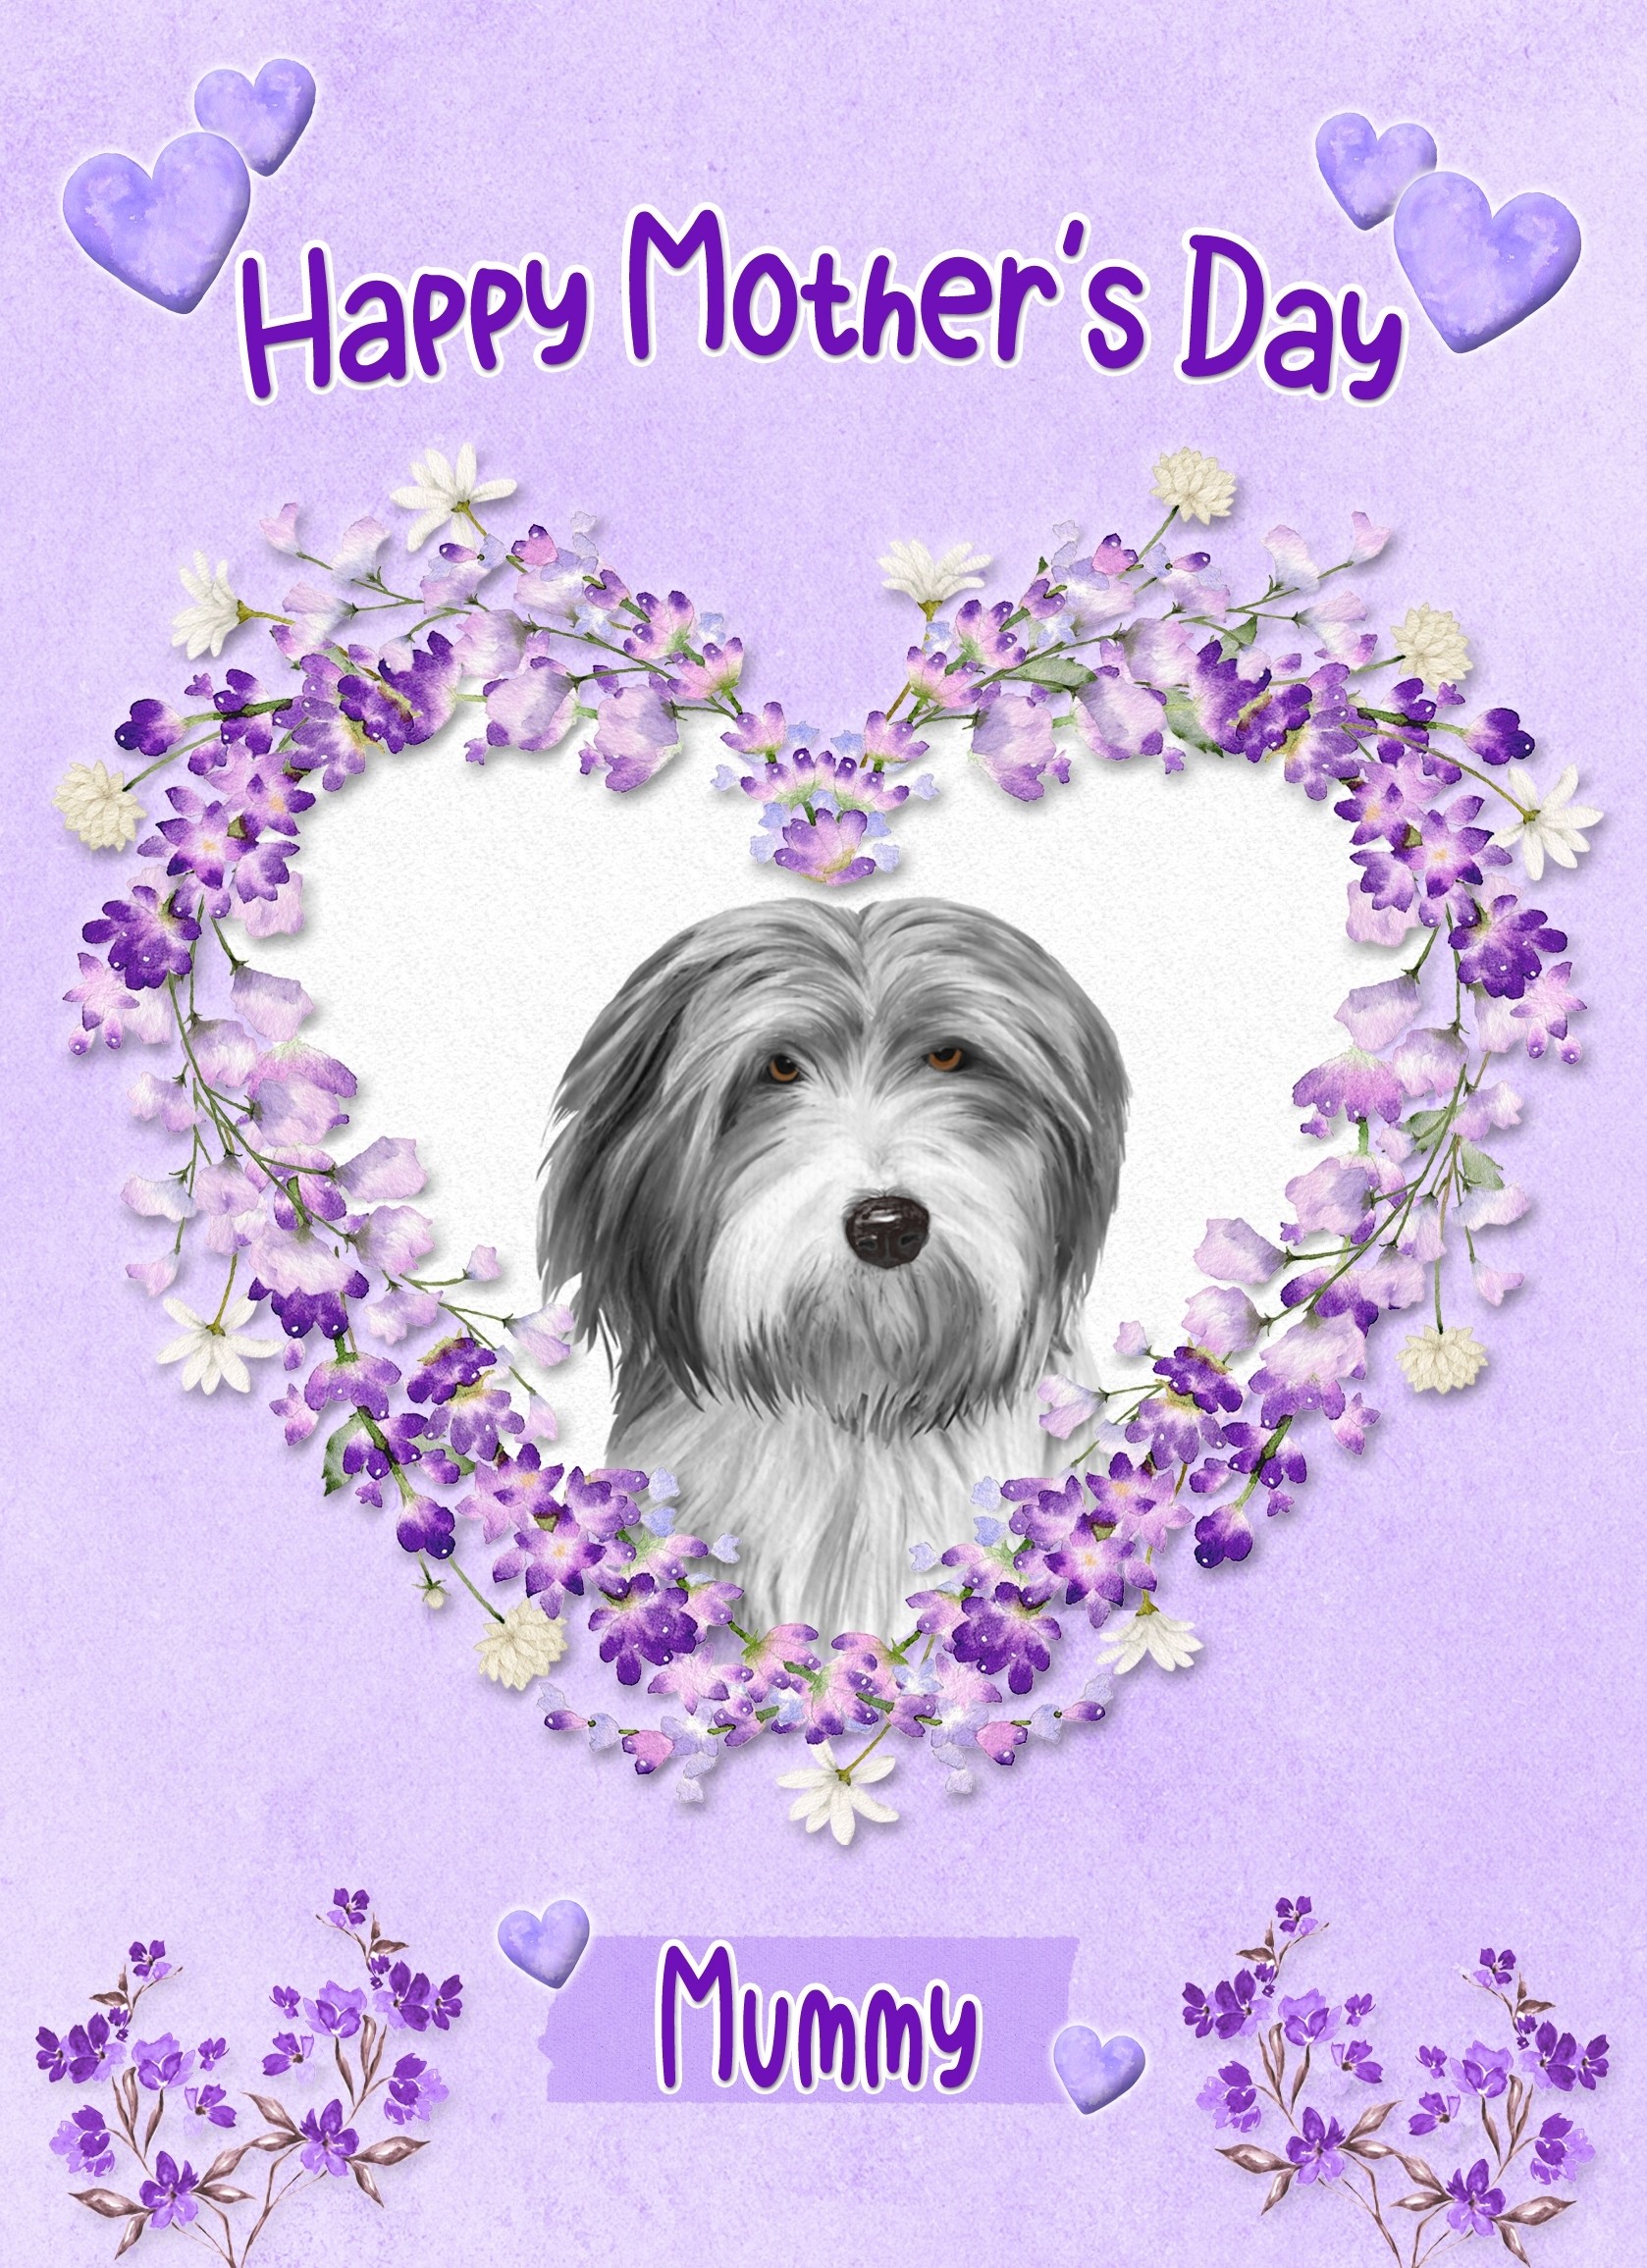 Bearded Collie Dog Mothers Day Card (Happy Mothers, Mummy)